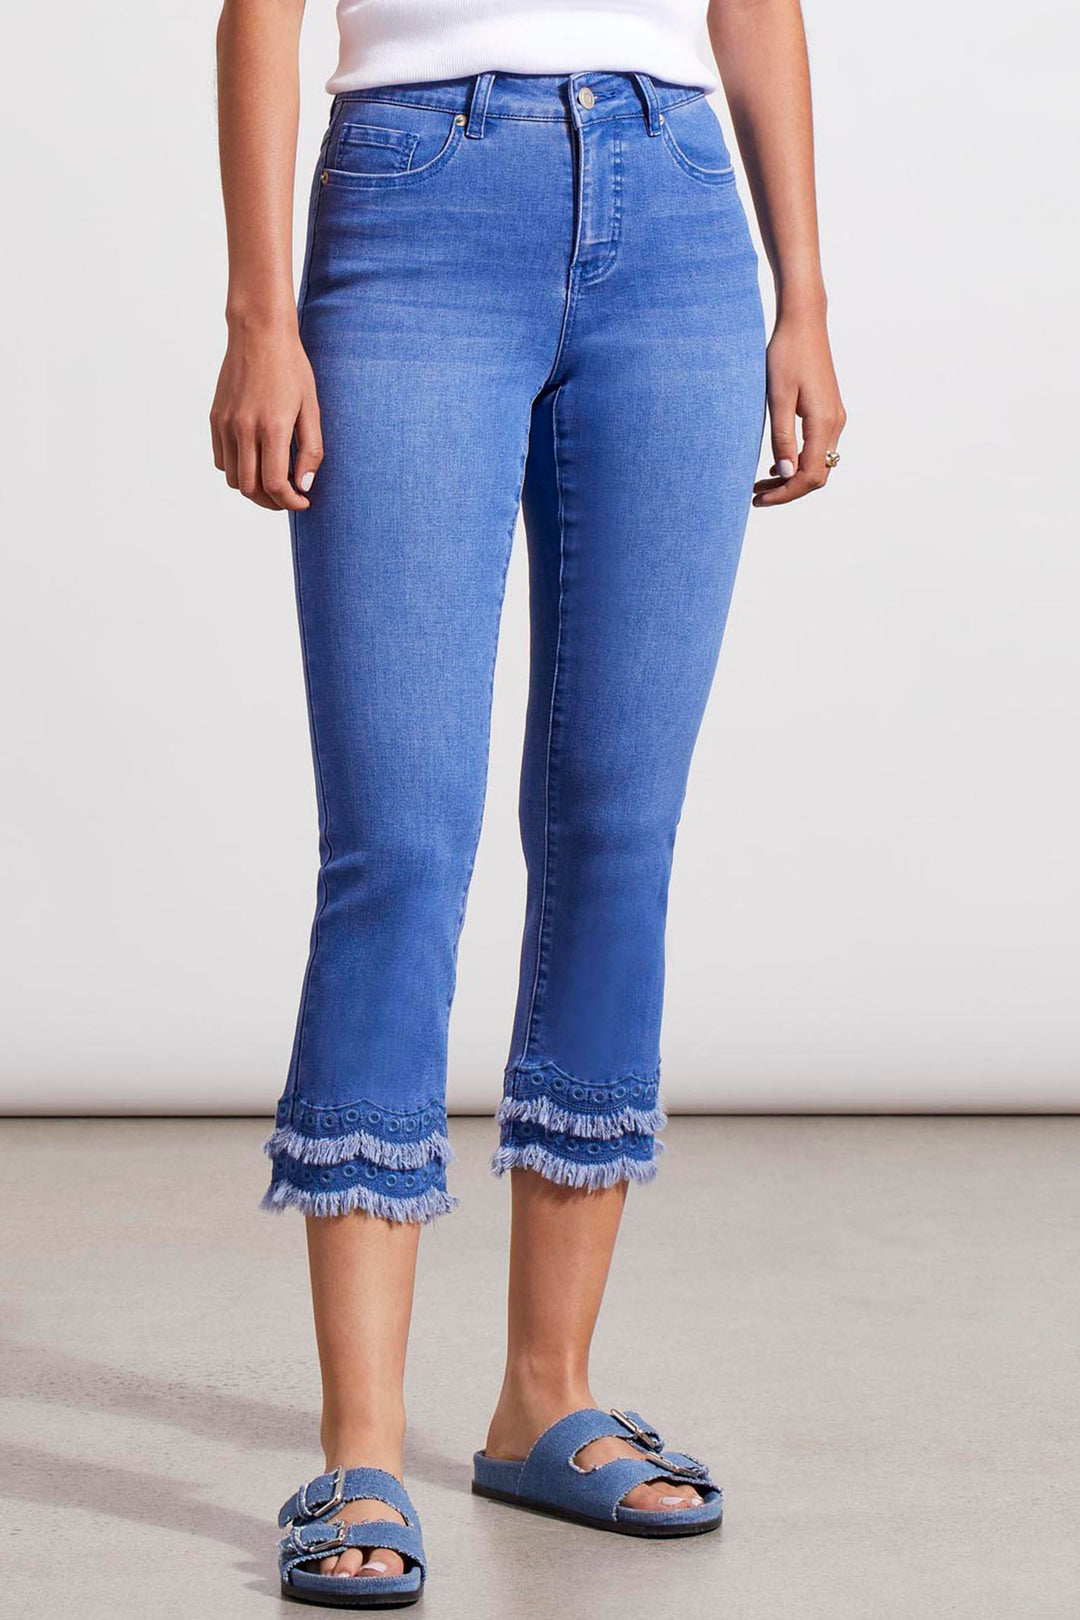 Tribal 5426O Sea Sapphire Blue Fray Hem Cropped Jeans - Experience Boutique